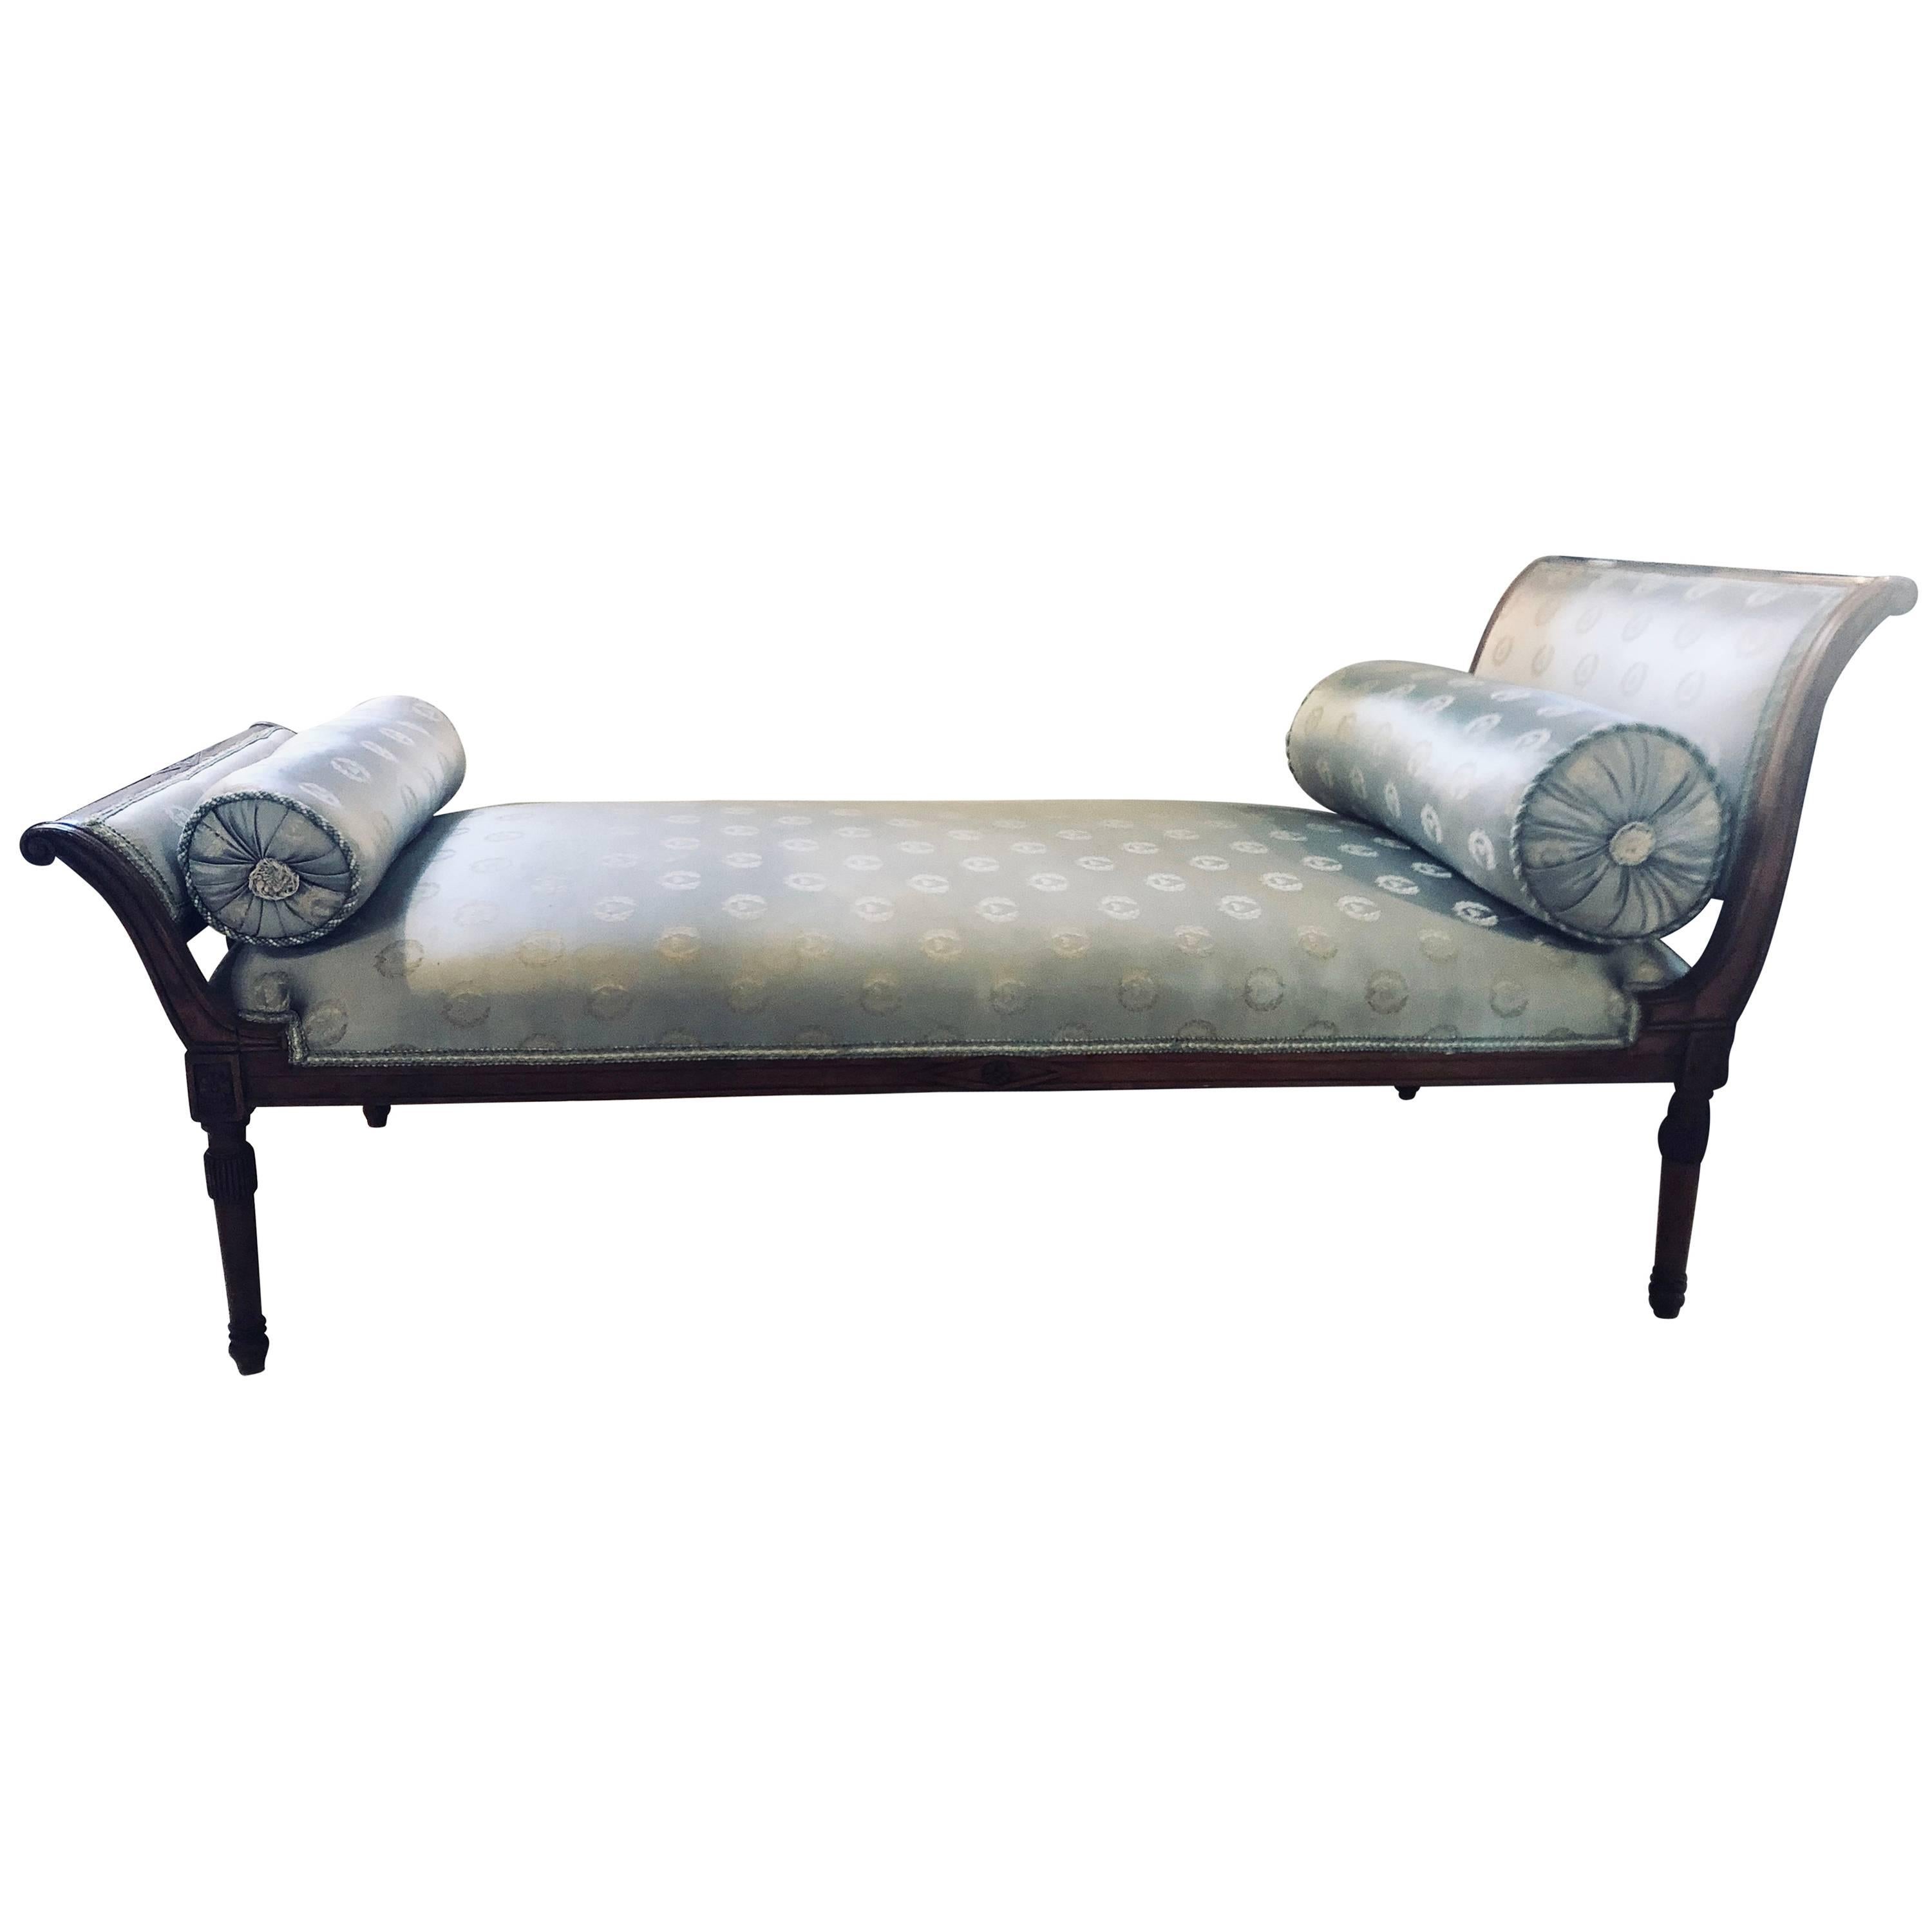 Fine Louis XVI Style Chaise lounge in Celeste Blue Upholstery